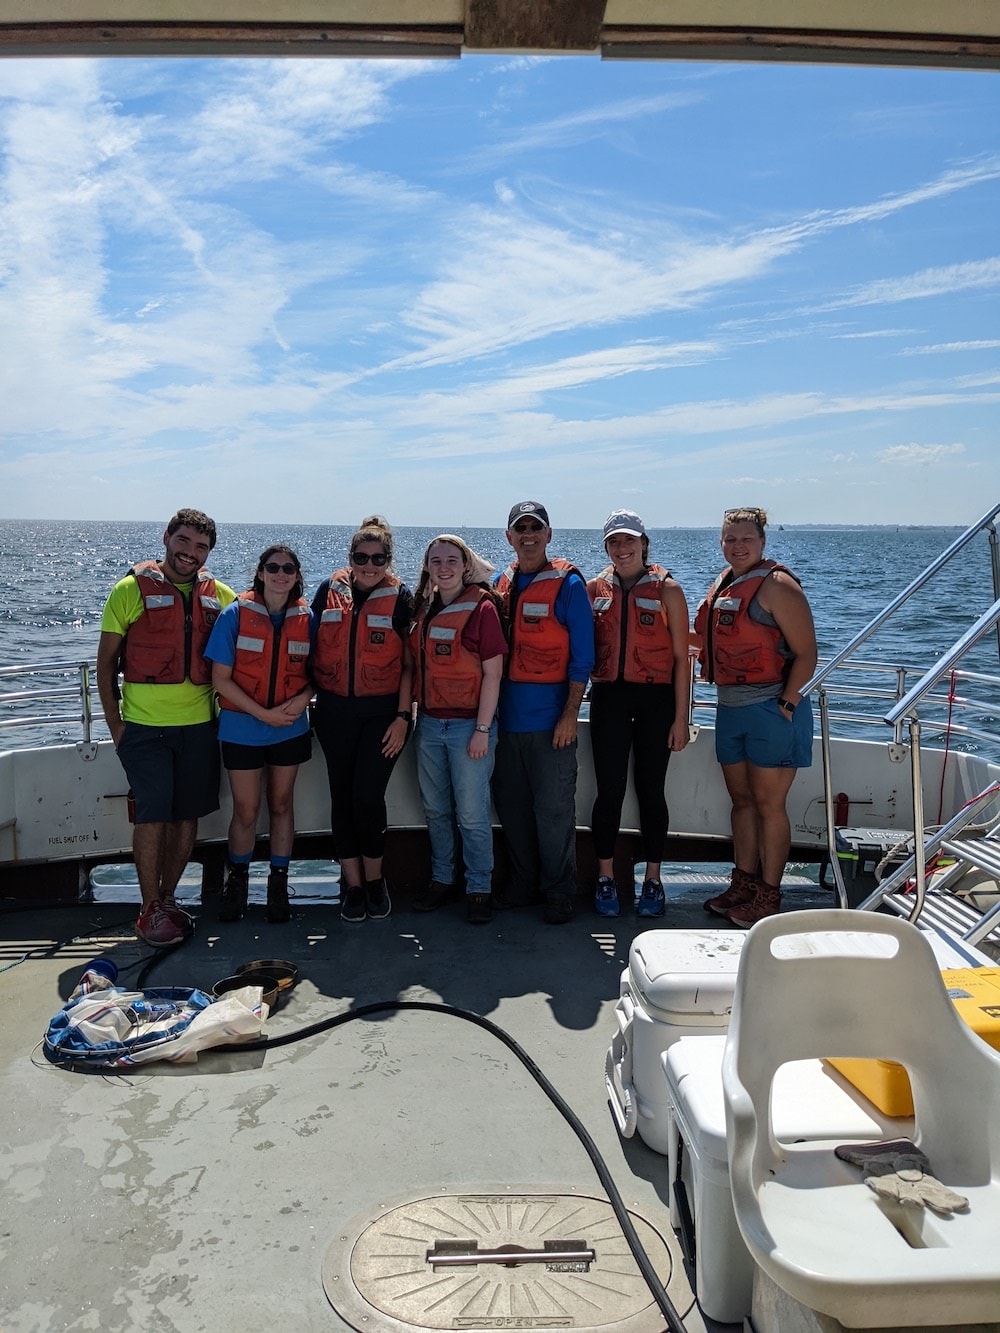 A group of students and faculty on a boat out in the water